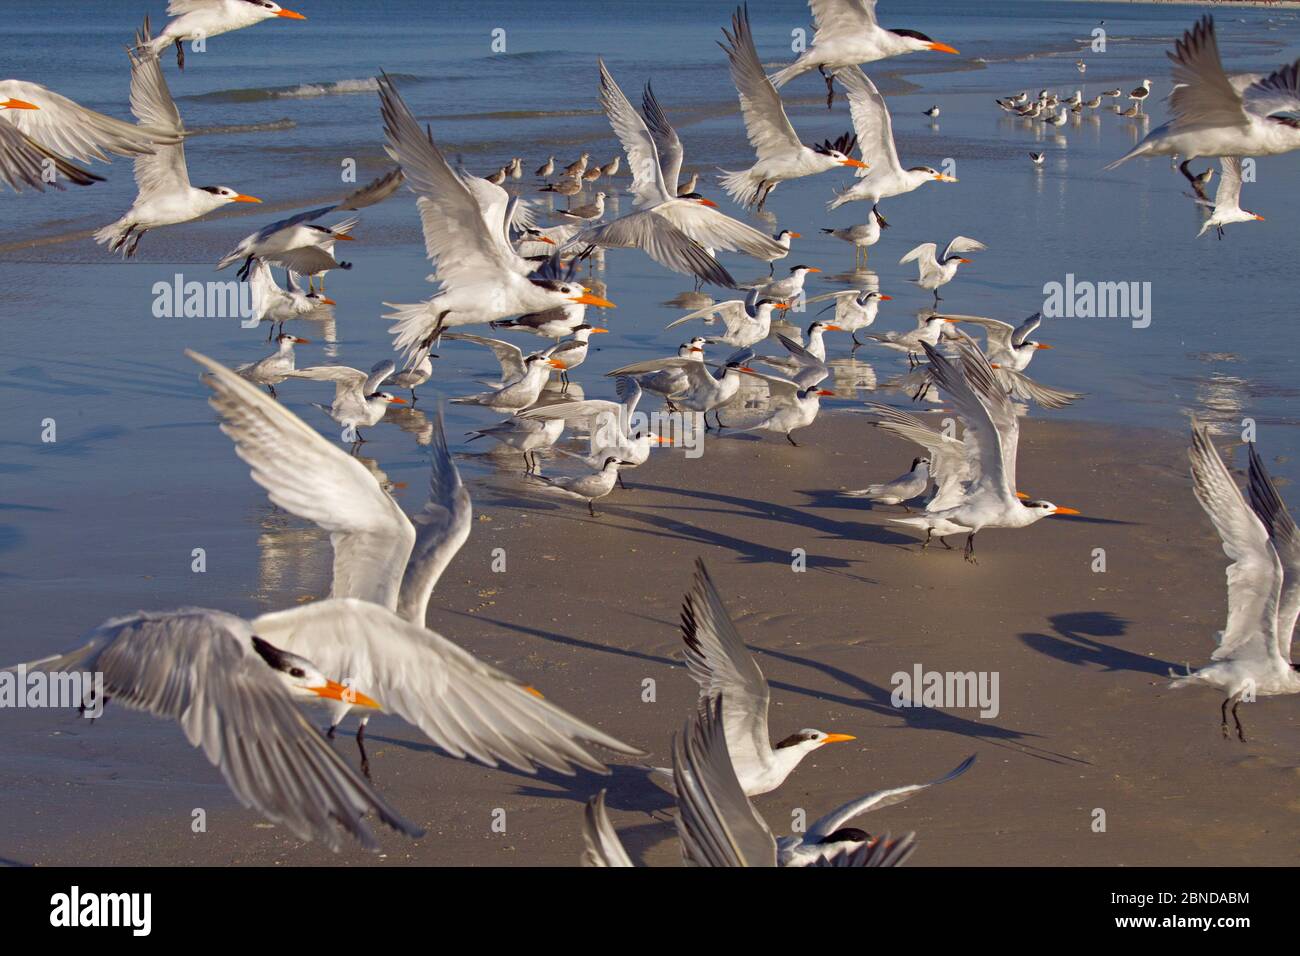 Flock of Sandwich terns (Thalasseus sandvicensis) and Royal terns (Sterna maxima) in flight. Fort Myers Beach, Florida, USA, March. Stock Photo